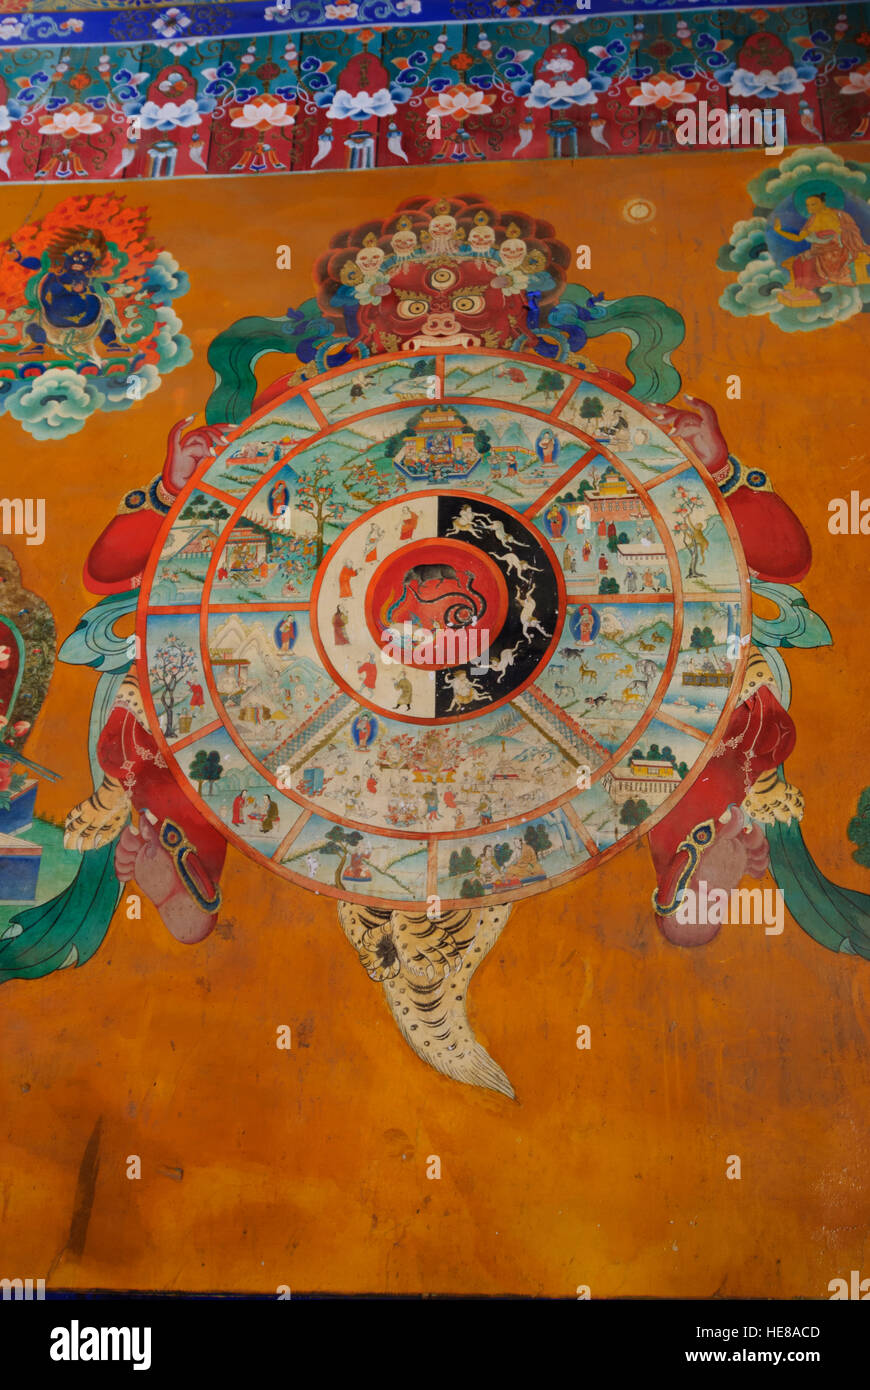 Samye: Monastery; Wheel of life, held by the mouth of Yamas, the Lord of death, Tibet, China Stock Photo